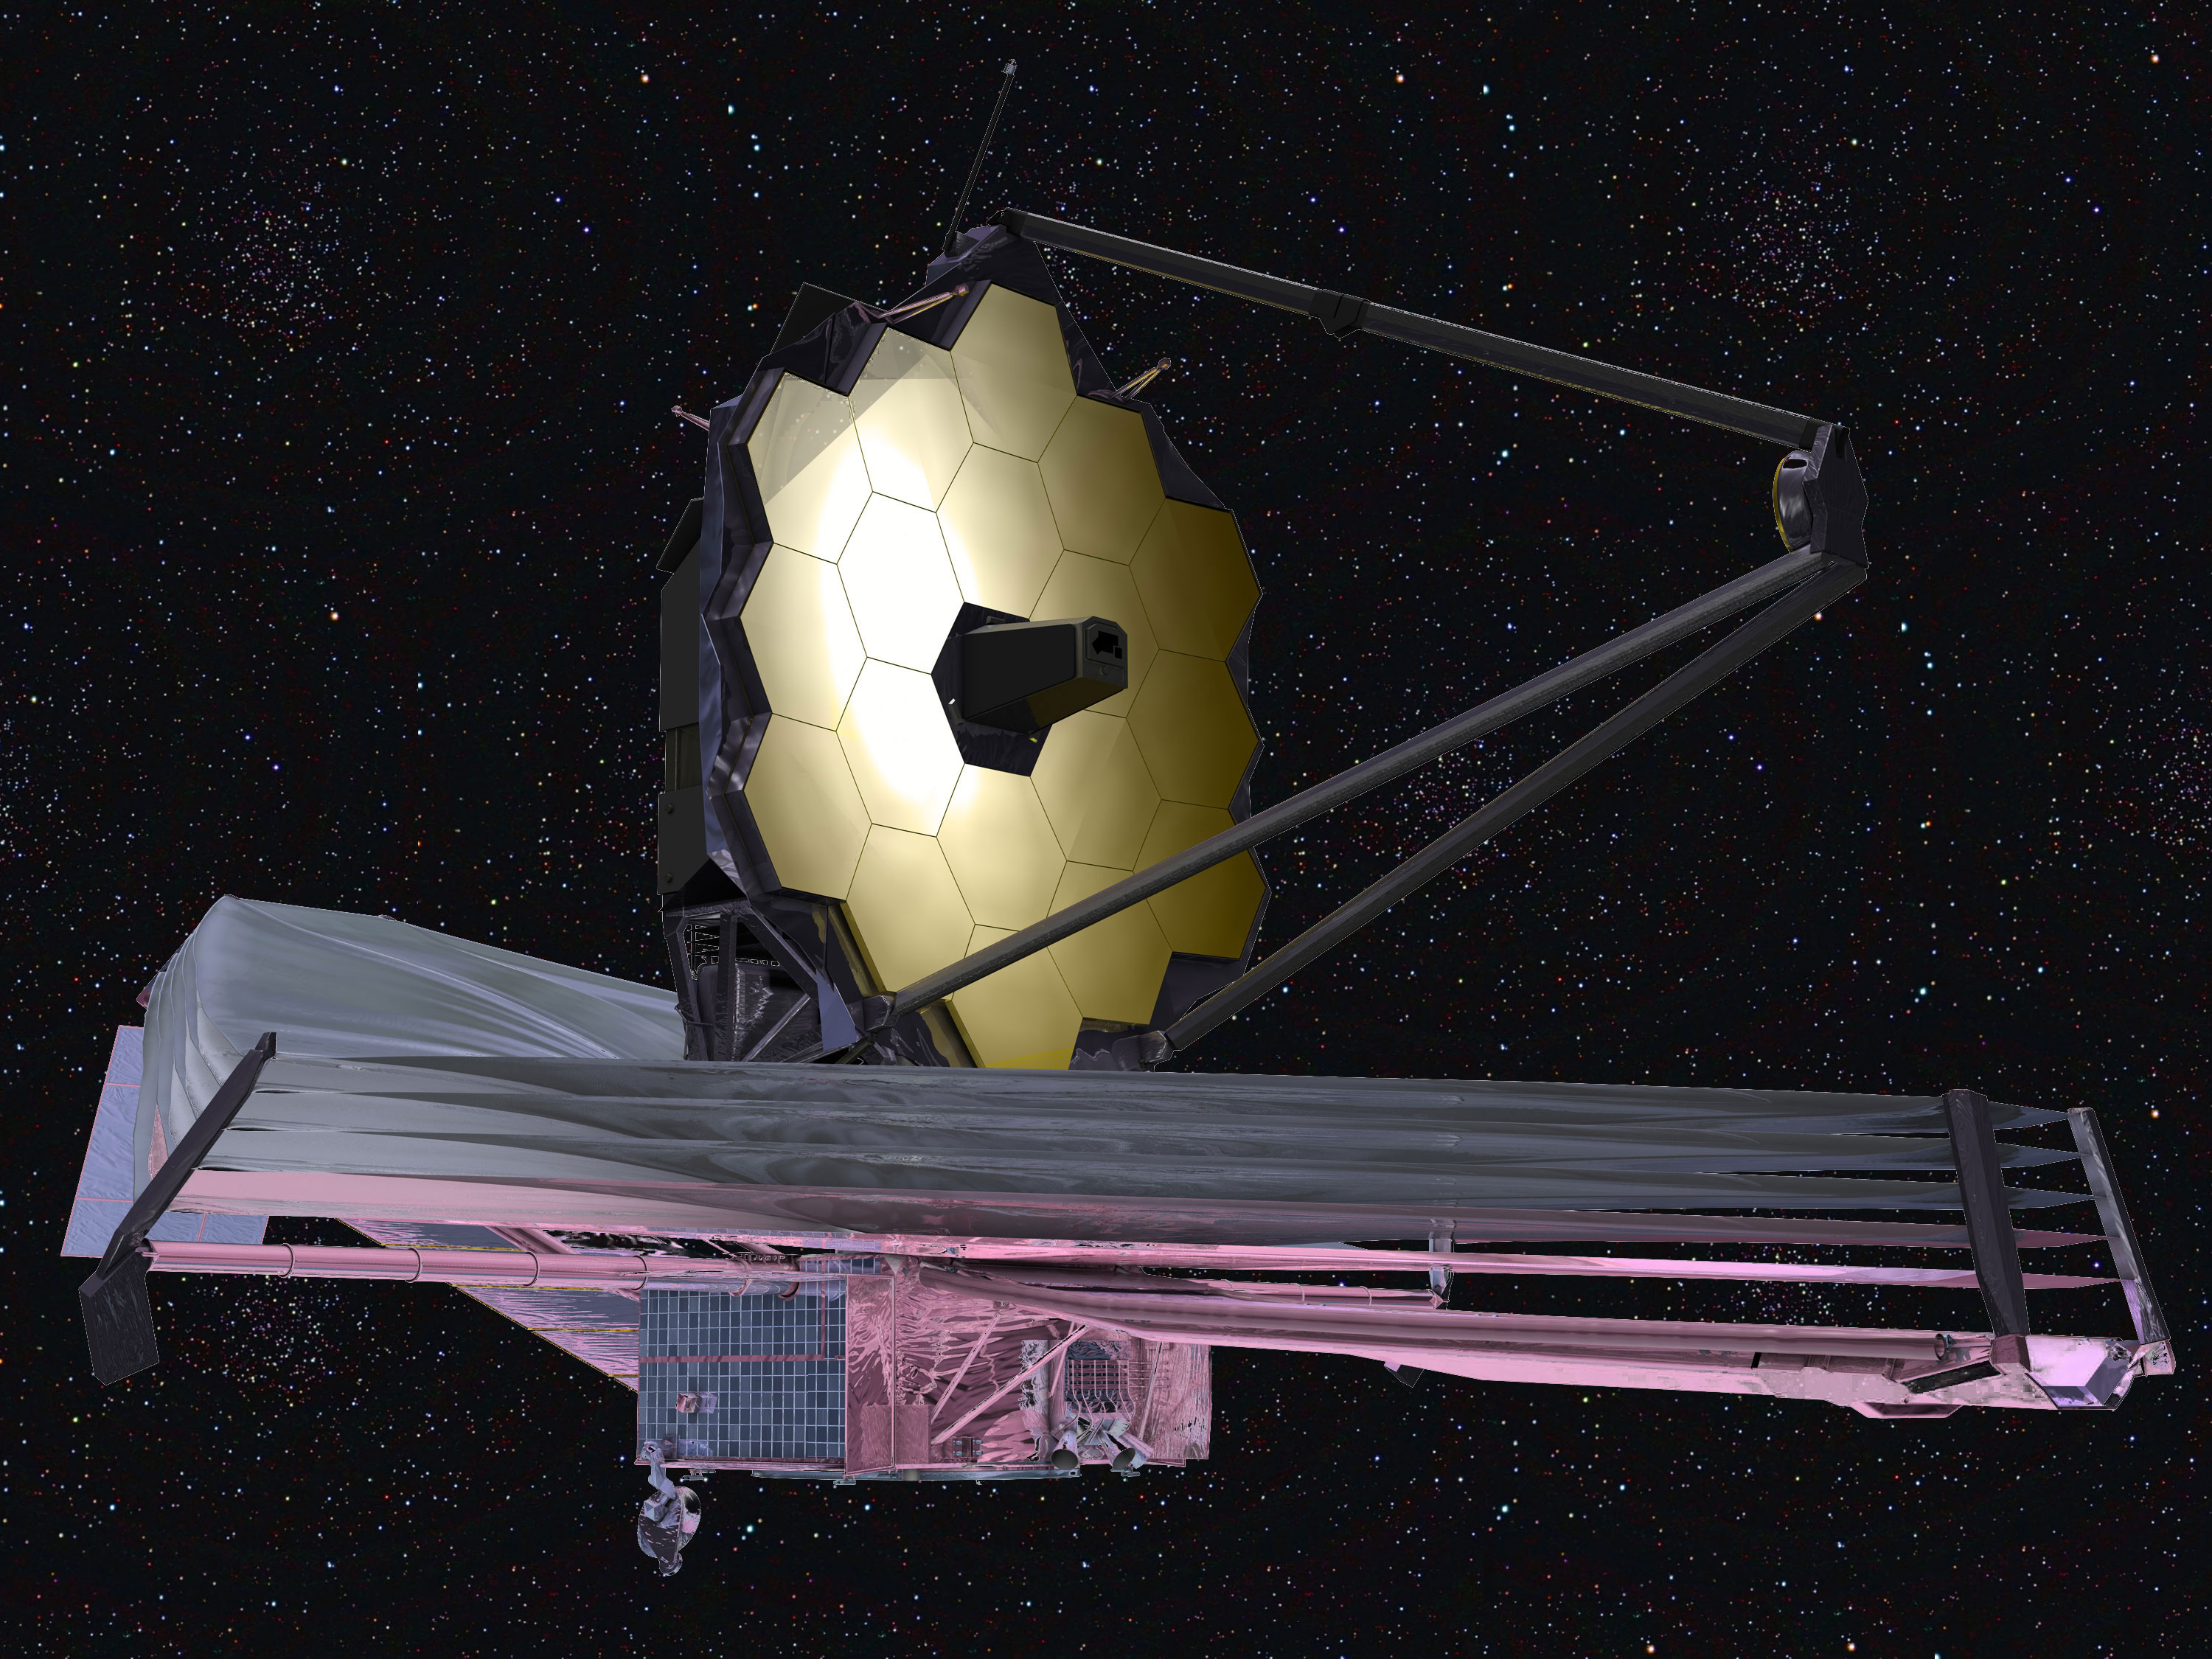 What's coming after Hubble and James Webb? The High-Definition Space  Telescope